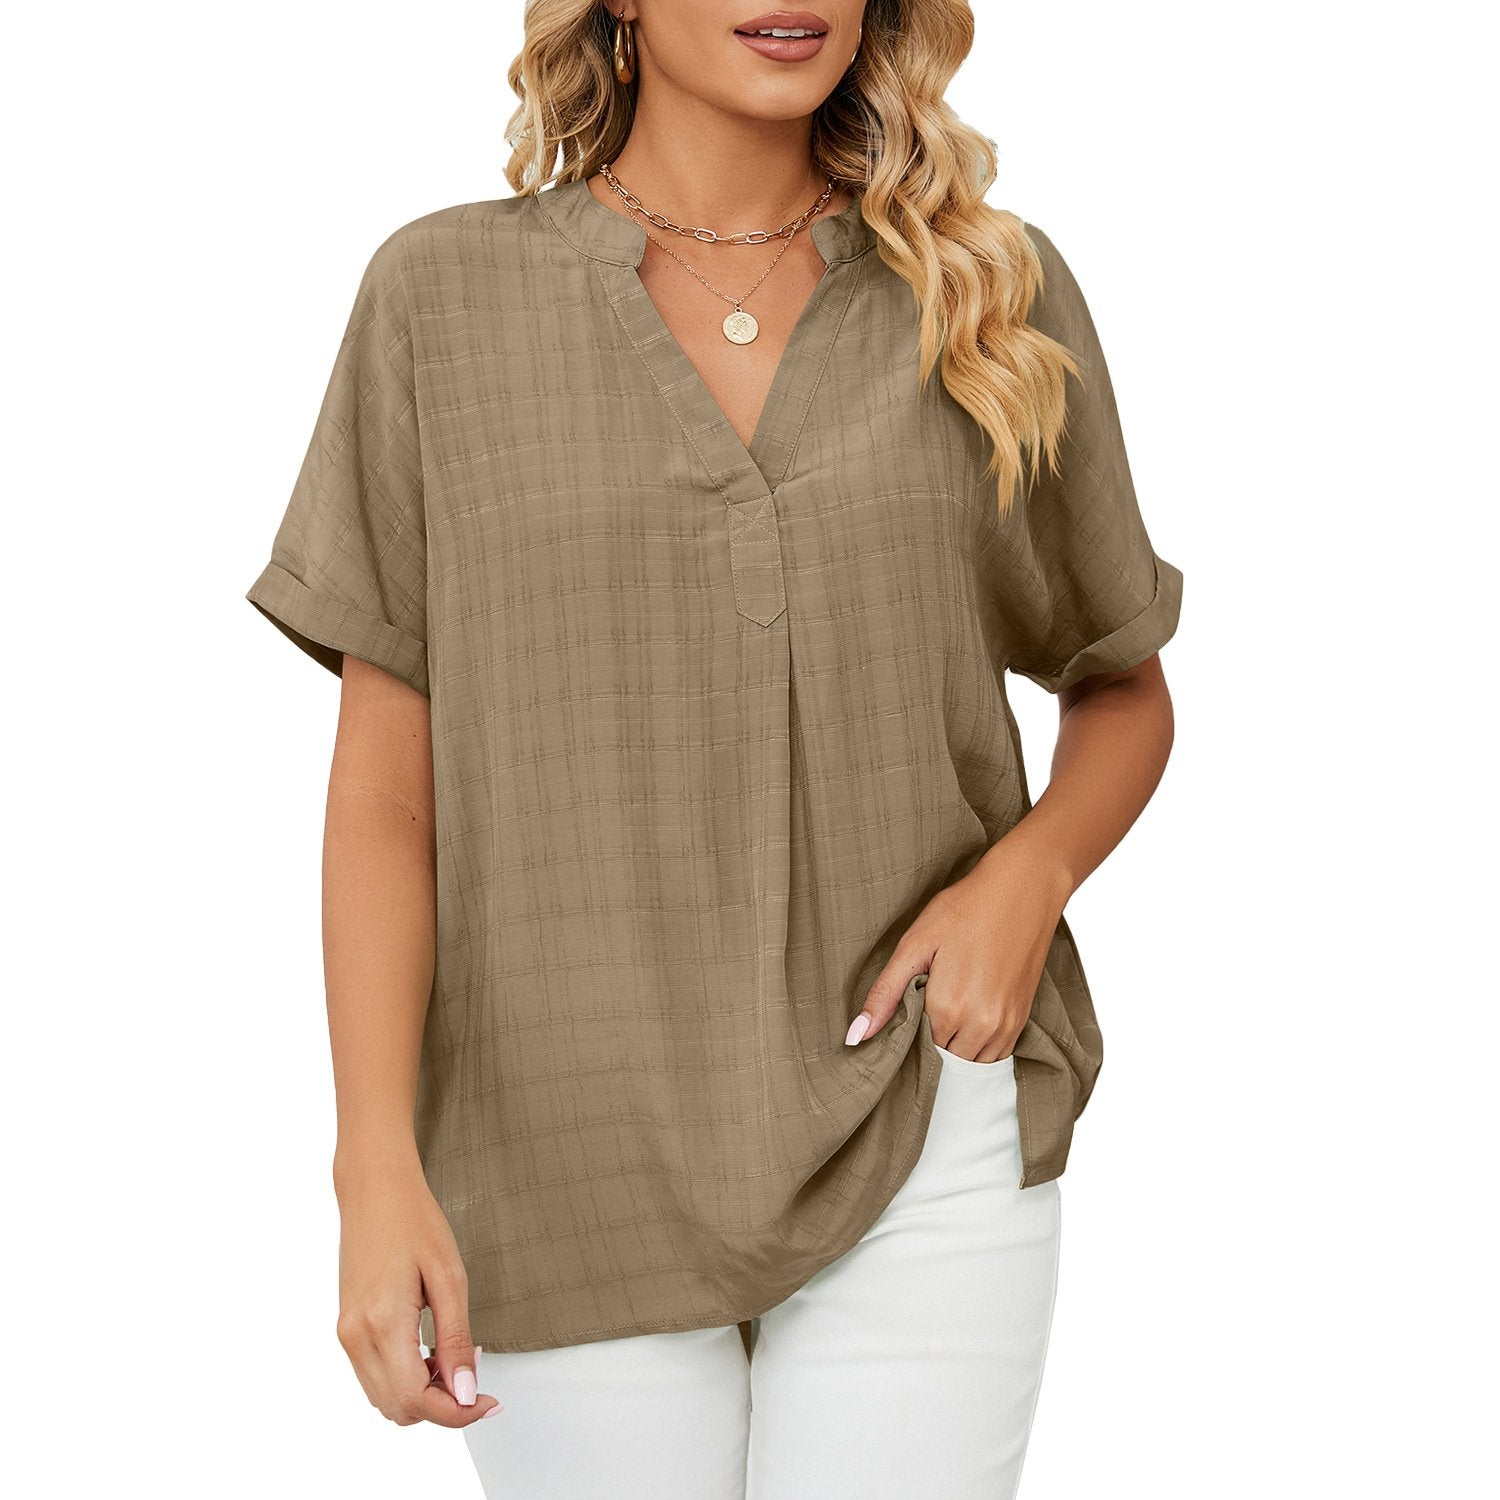 New Women's Solid Color Loose Casual Bottoming T-Shirts